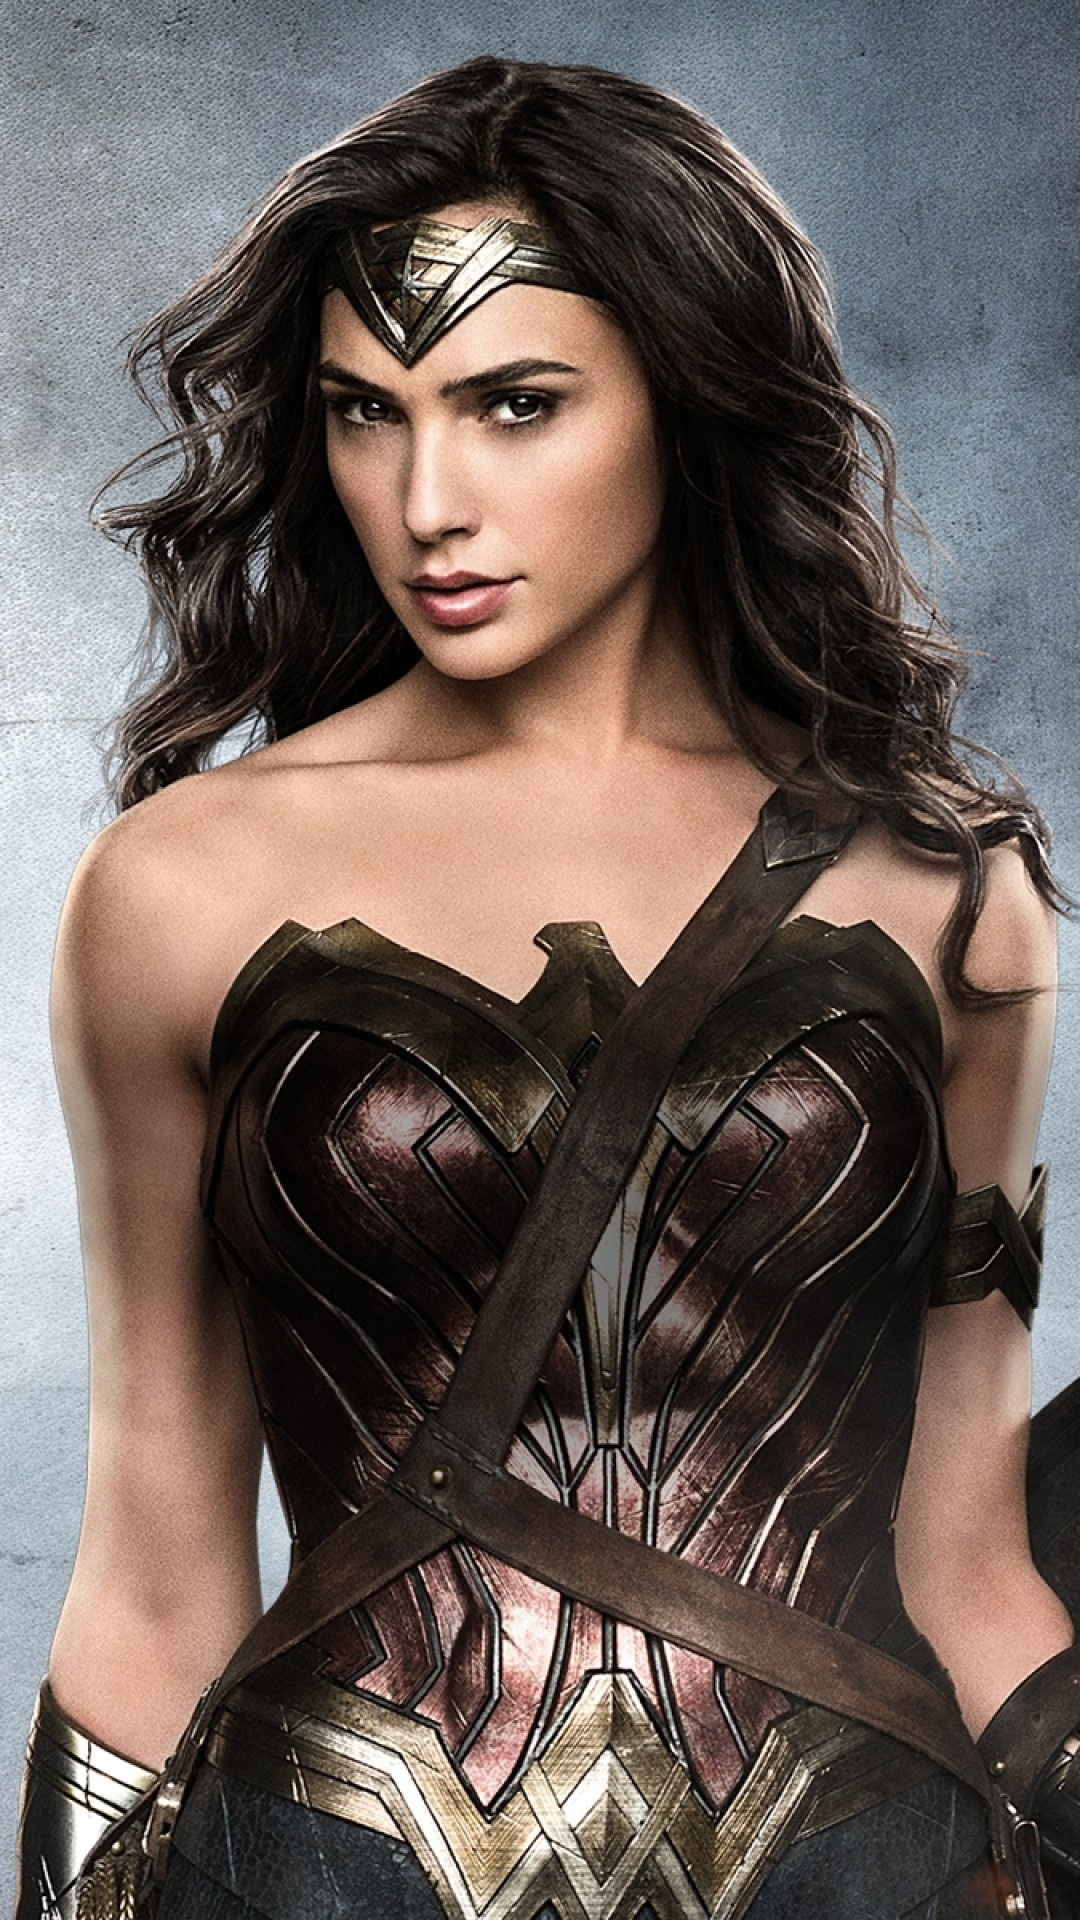 Download 1080x1920 Gal Gadot, Wonder Women, Shield Wallpaper for iPhone iPhone 7 Plus, iPhone 6+, Sony Xperia Z, HTC One